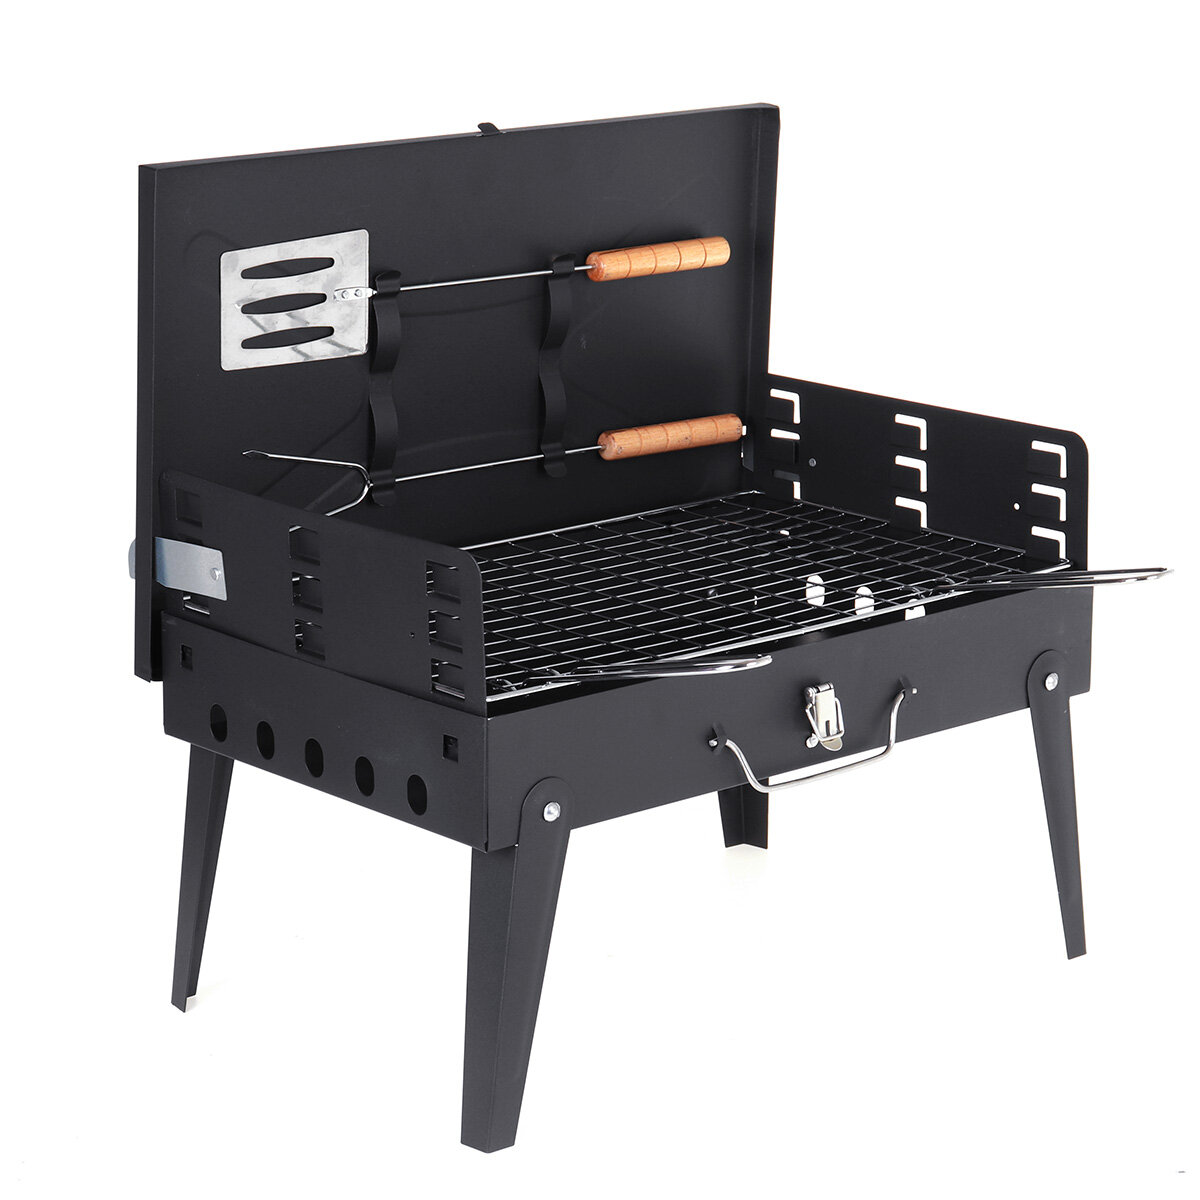 17.32x10.24x8.66inch BBQ Grill Charcoal Folding Cooking Stove Barbecue Accessories Camping Picnic Travel